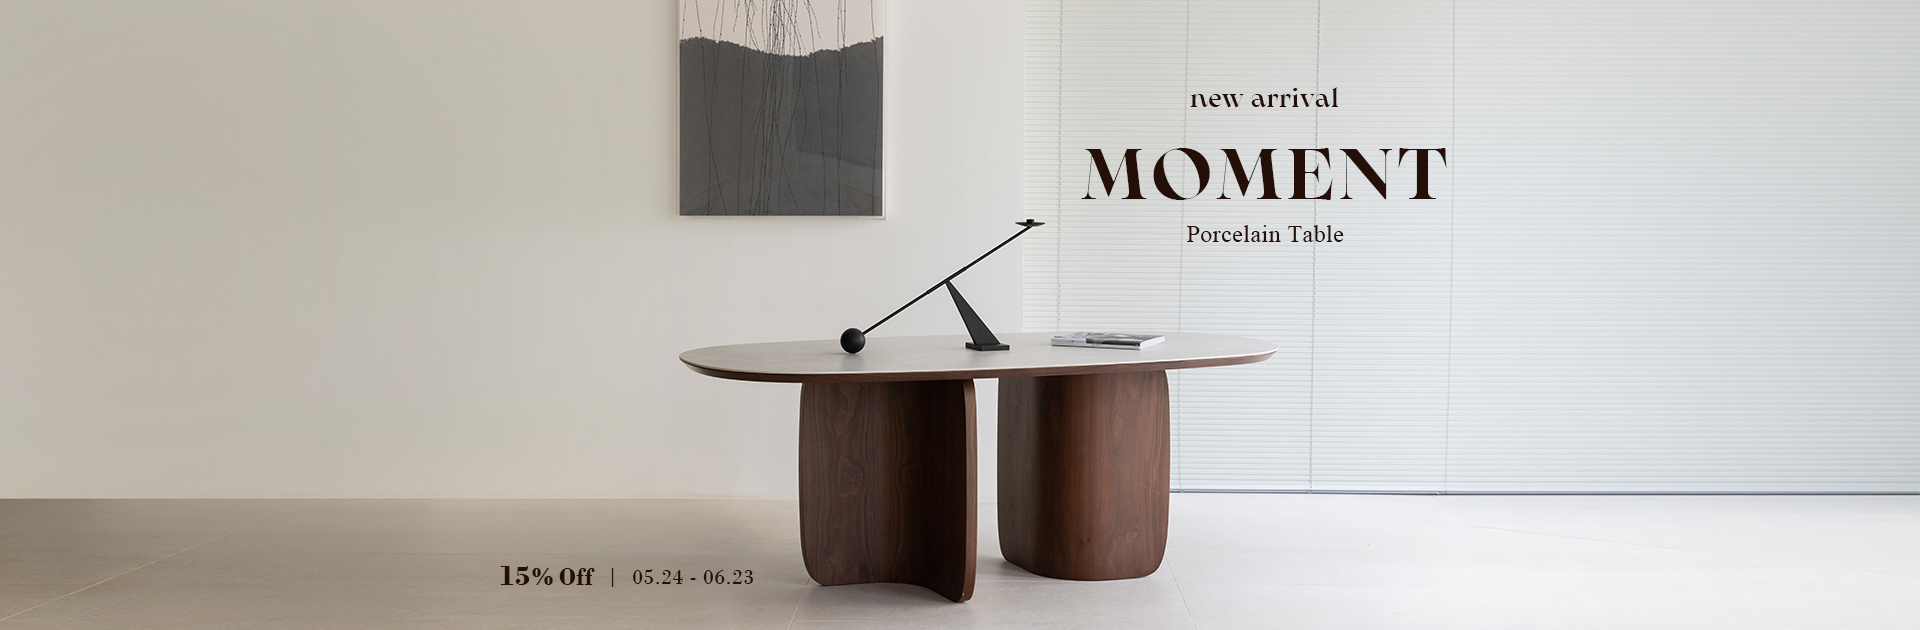 new arrival moment table